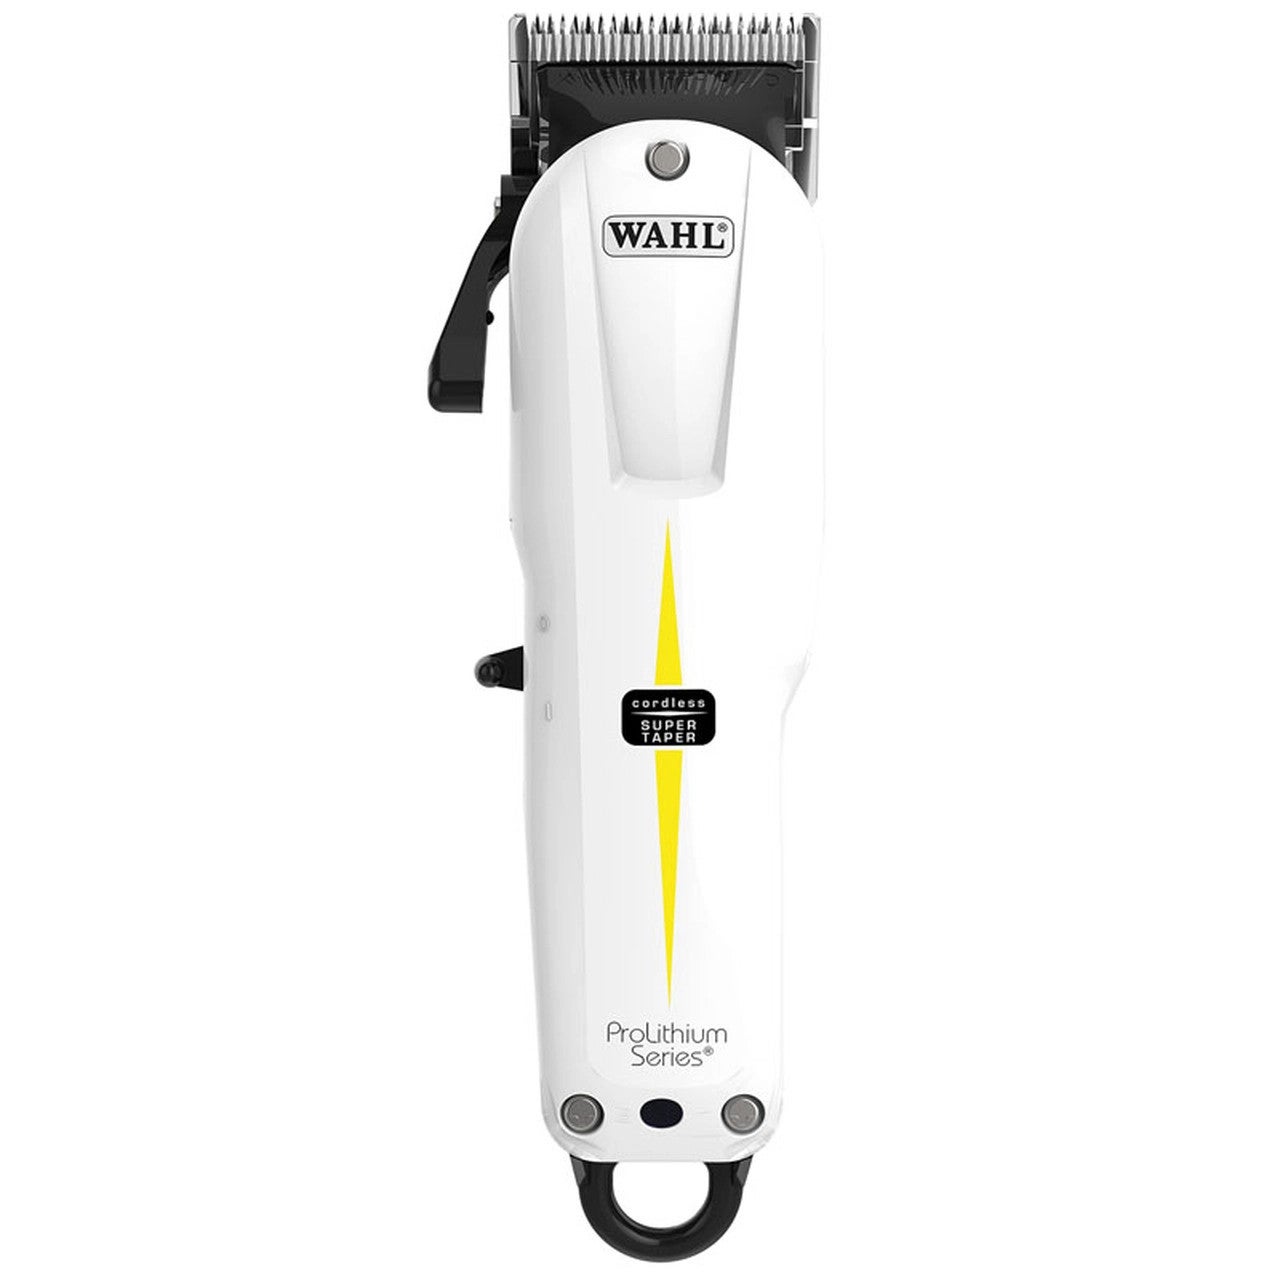 Wahl Professional Prolithium Series Cord/Cordless Taper Clipper